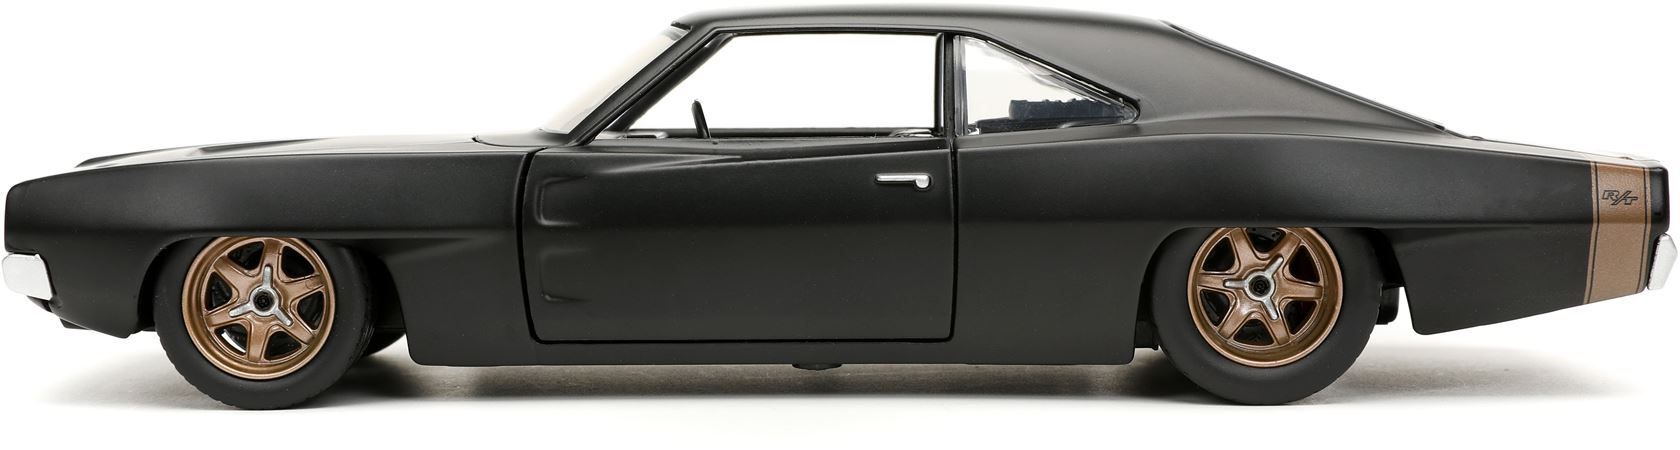 Fast-Furious-1968-Dodge-Charger-1-24